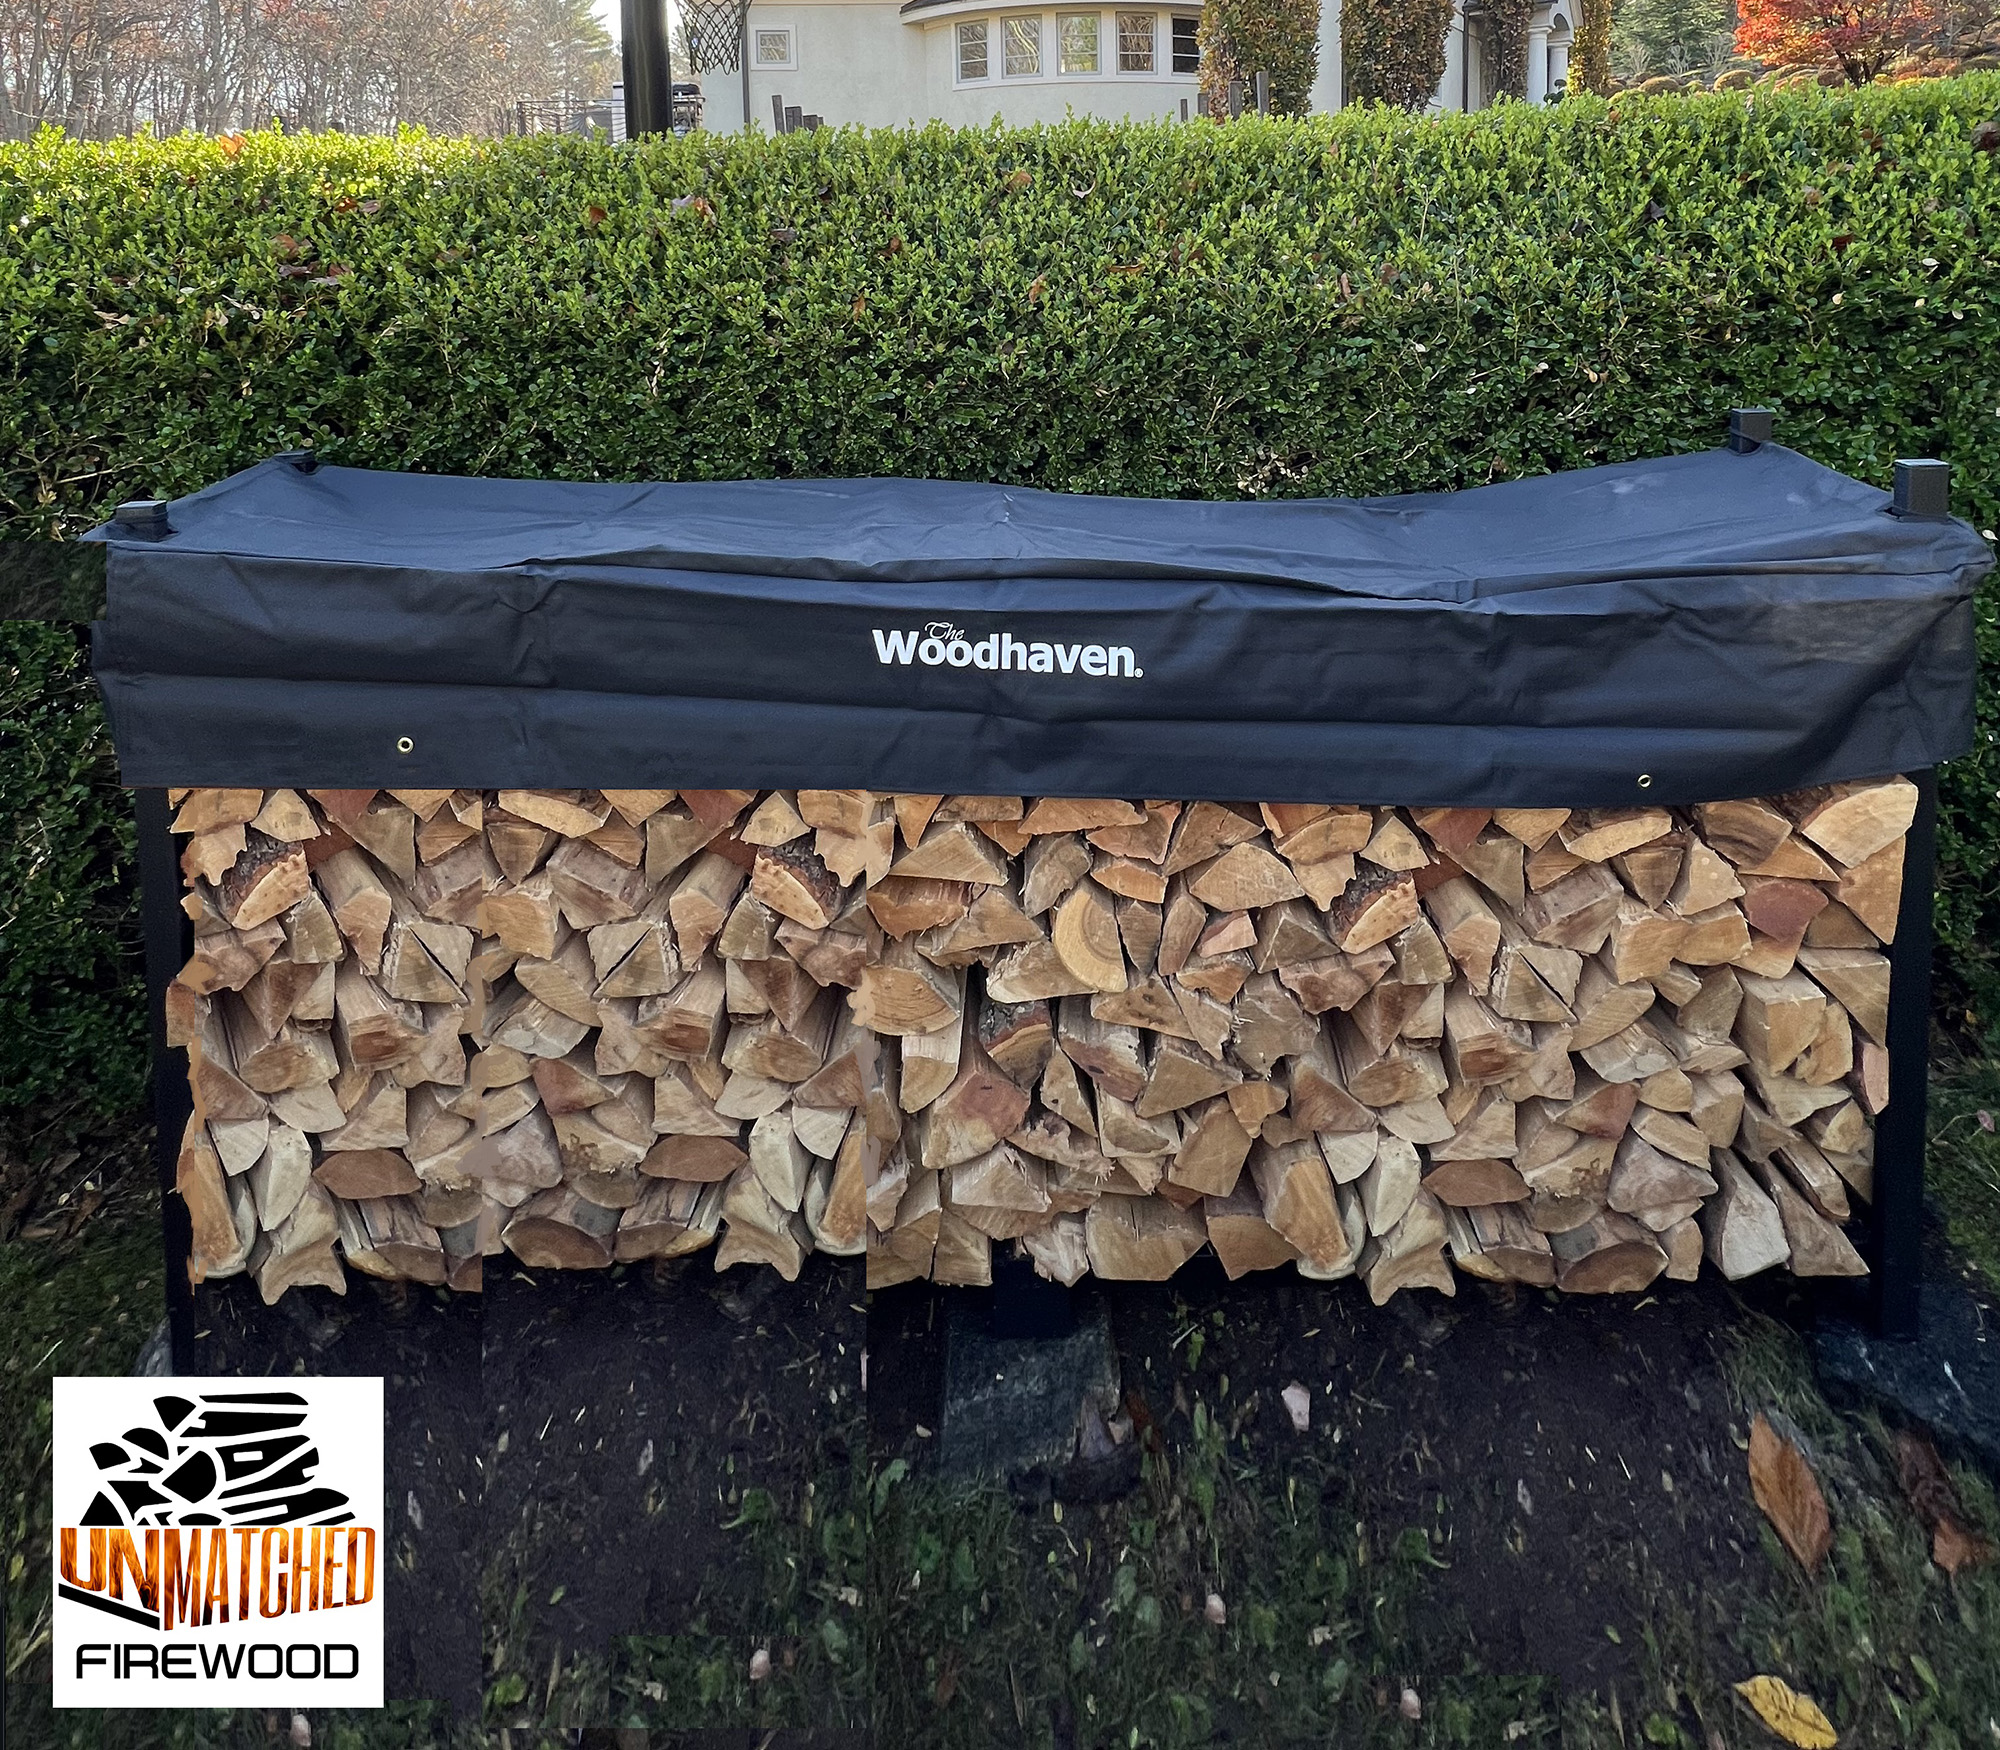 Unmatched Firewood: New Canaan Firewood